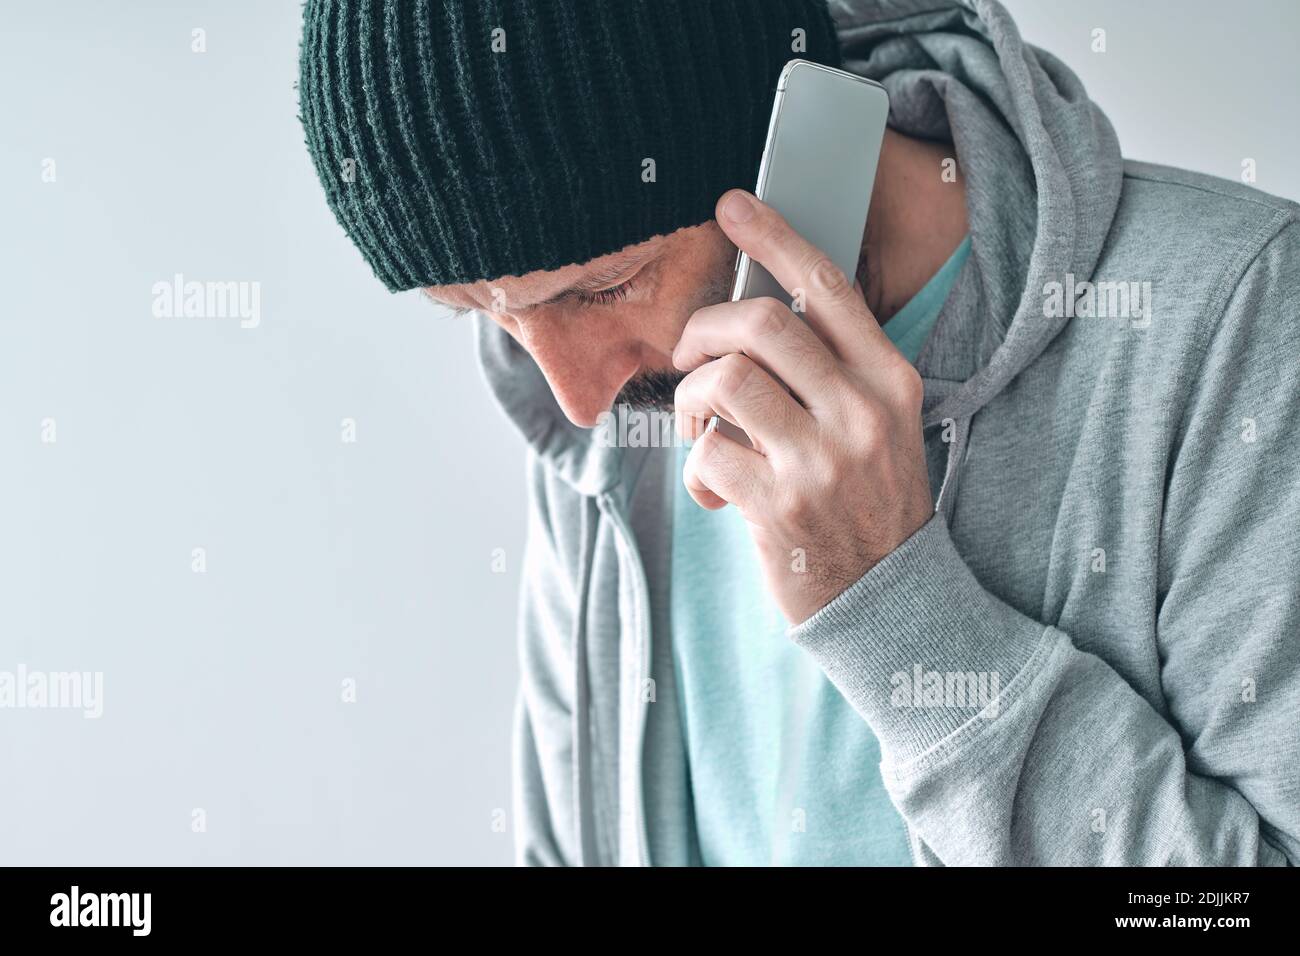 Unhappy man receiving bad news phone call, disappointed casual adult caucasian male talking on mobile phone and looking down, selective focus Stock Photo